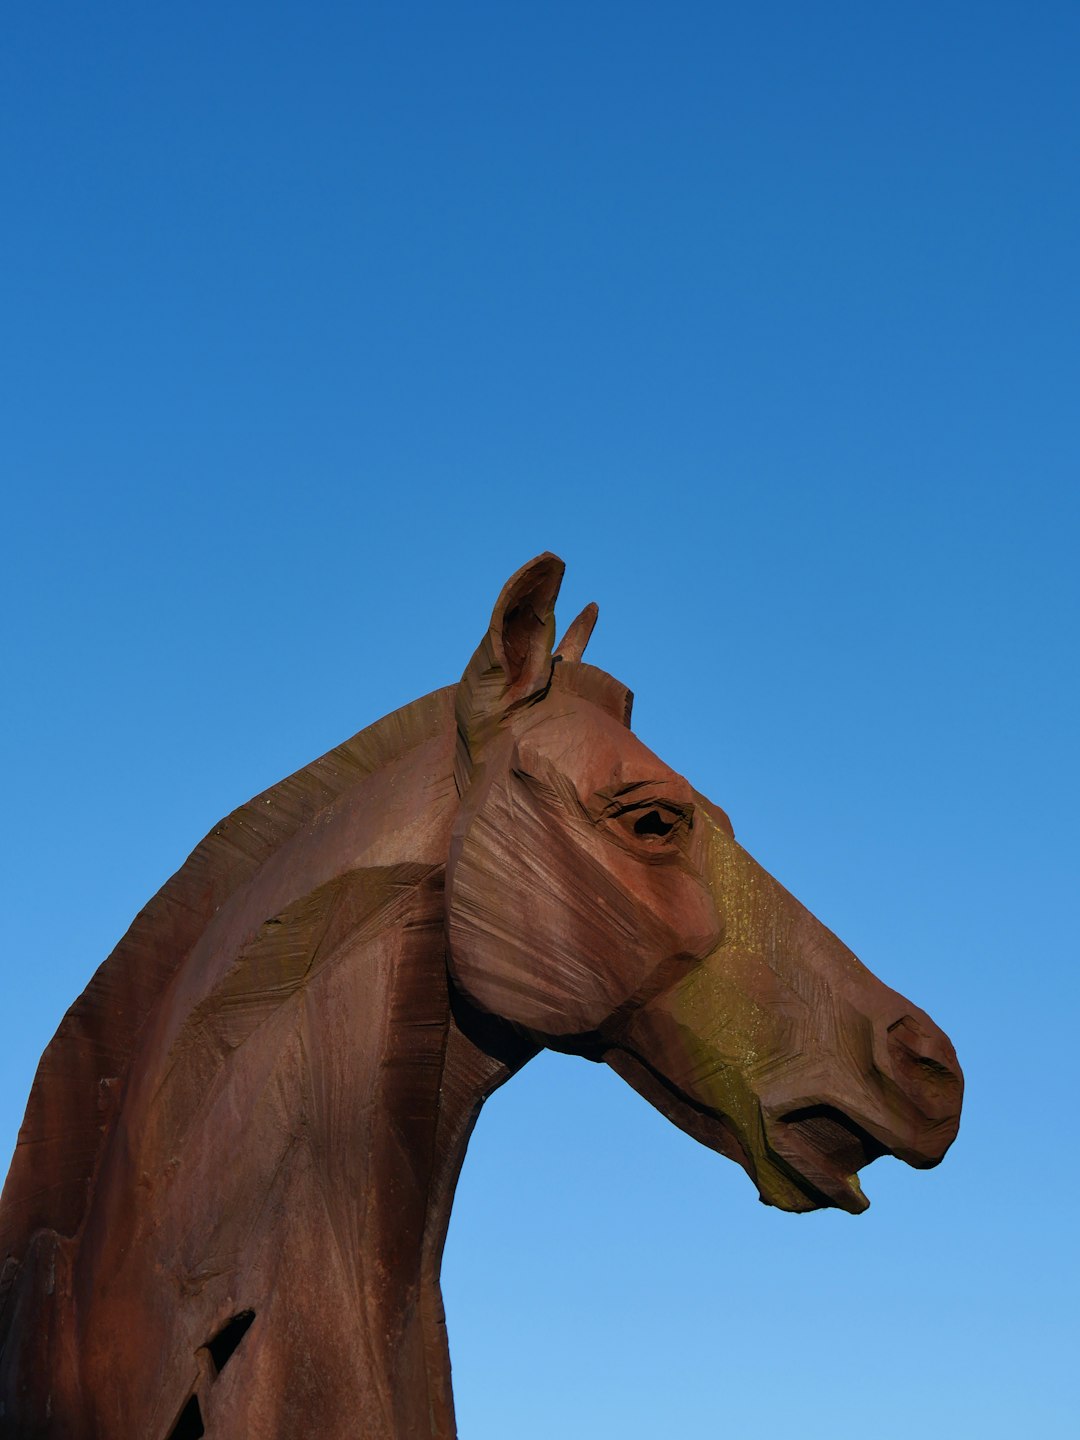 brown horse head statue under blue sky during daytime